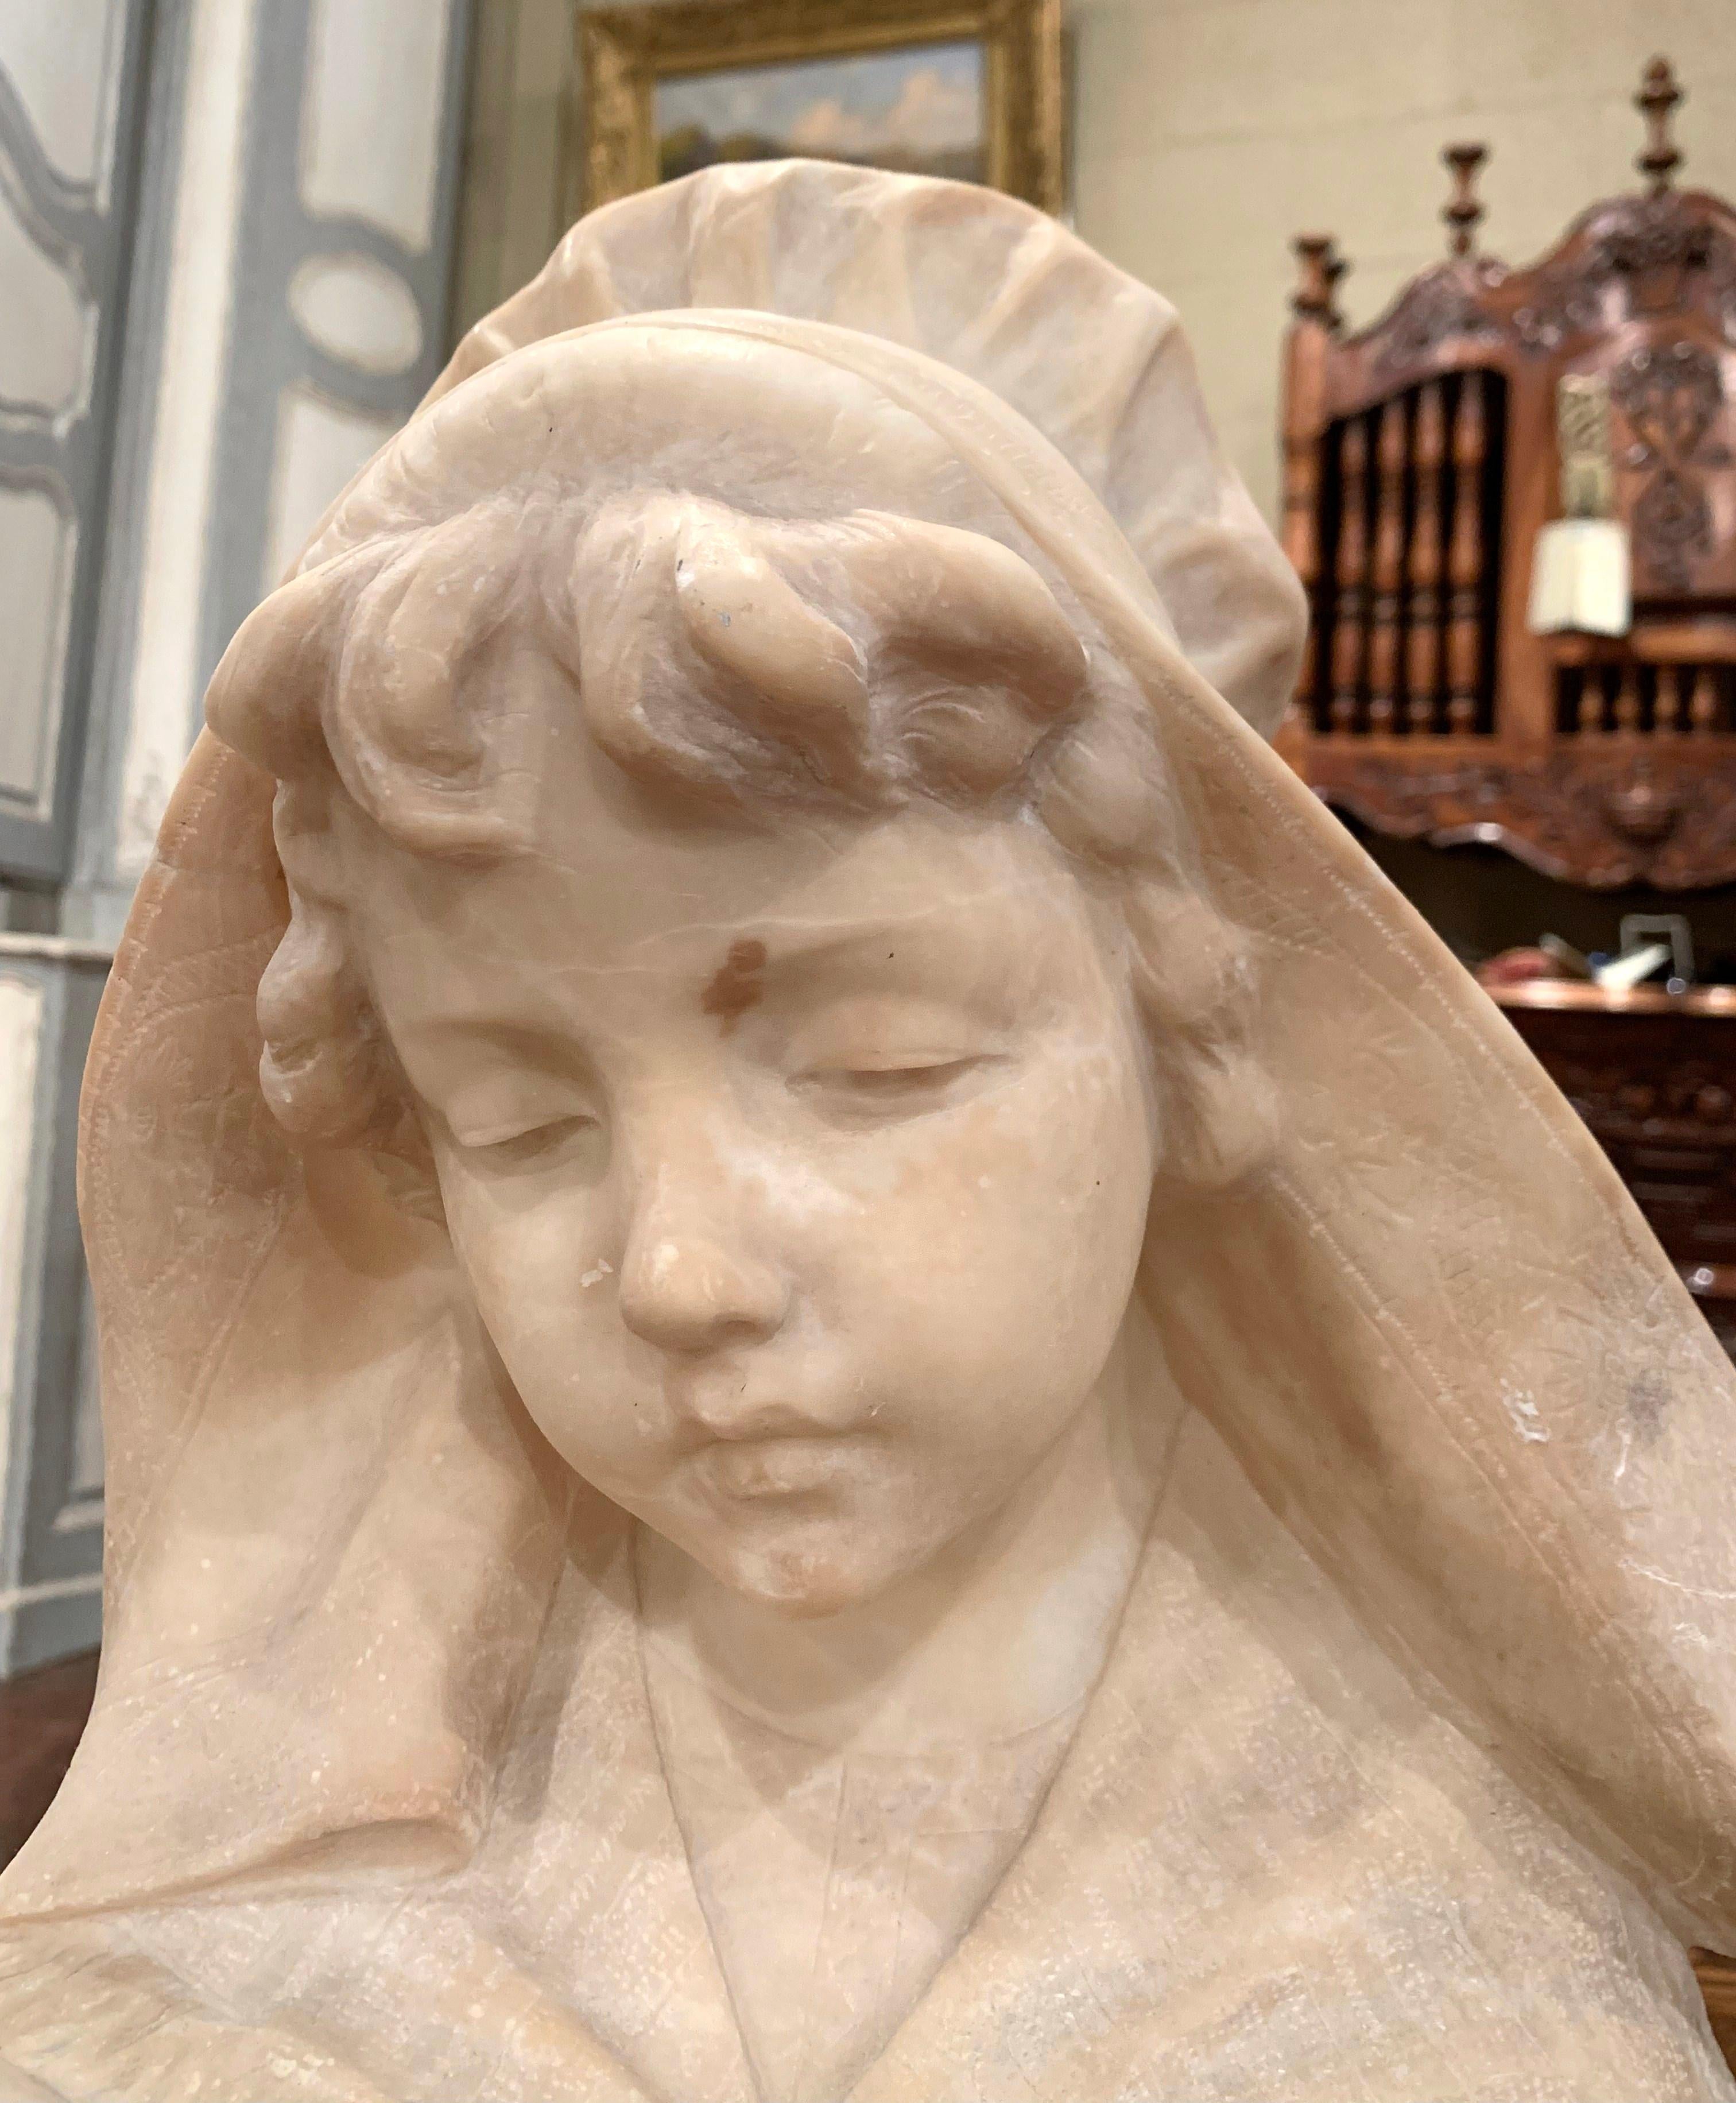 Crafted in France circa 1850, this large antique marble bust is a true representation of French elegance. The figural sculpture features the visage of a beautiful young beauty; she is dressed in a lace shawl over her shoulders, and holding a